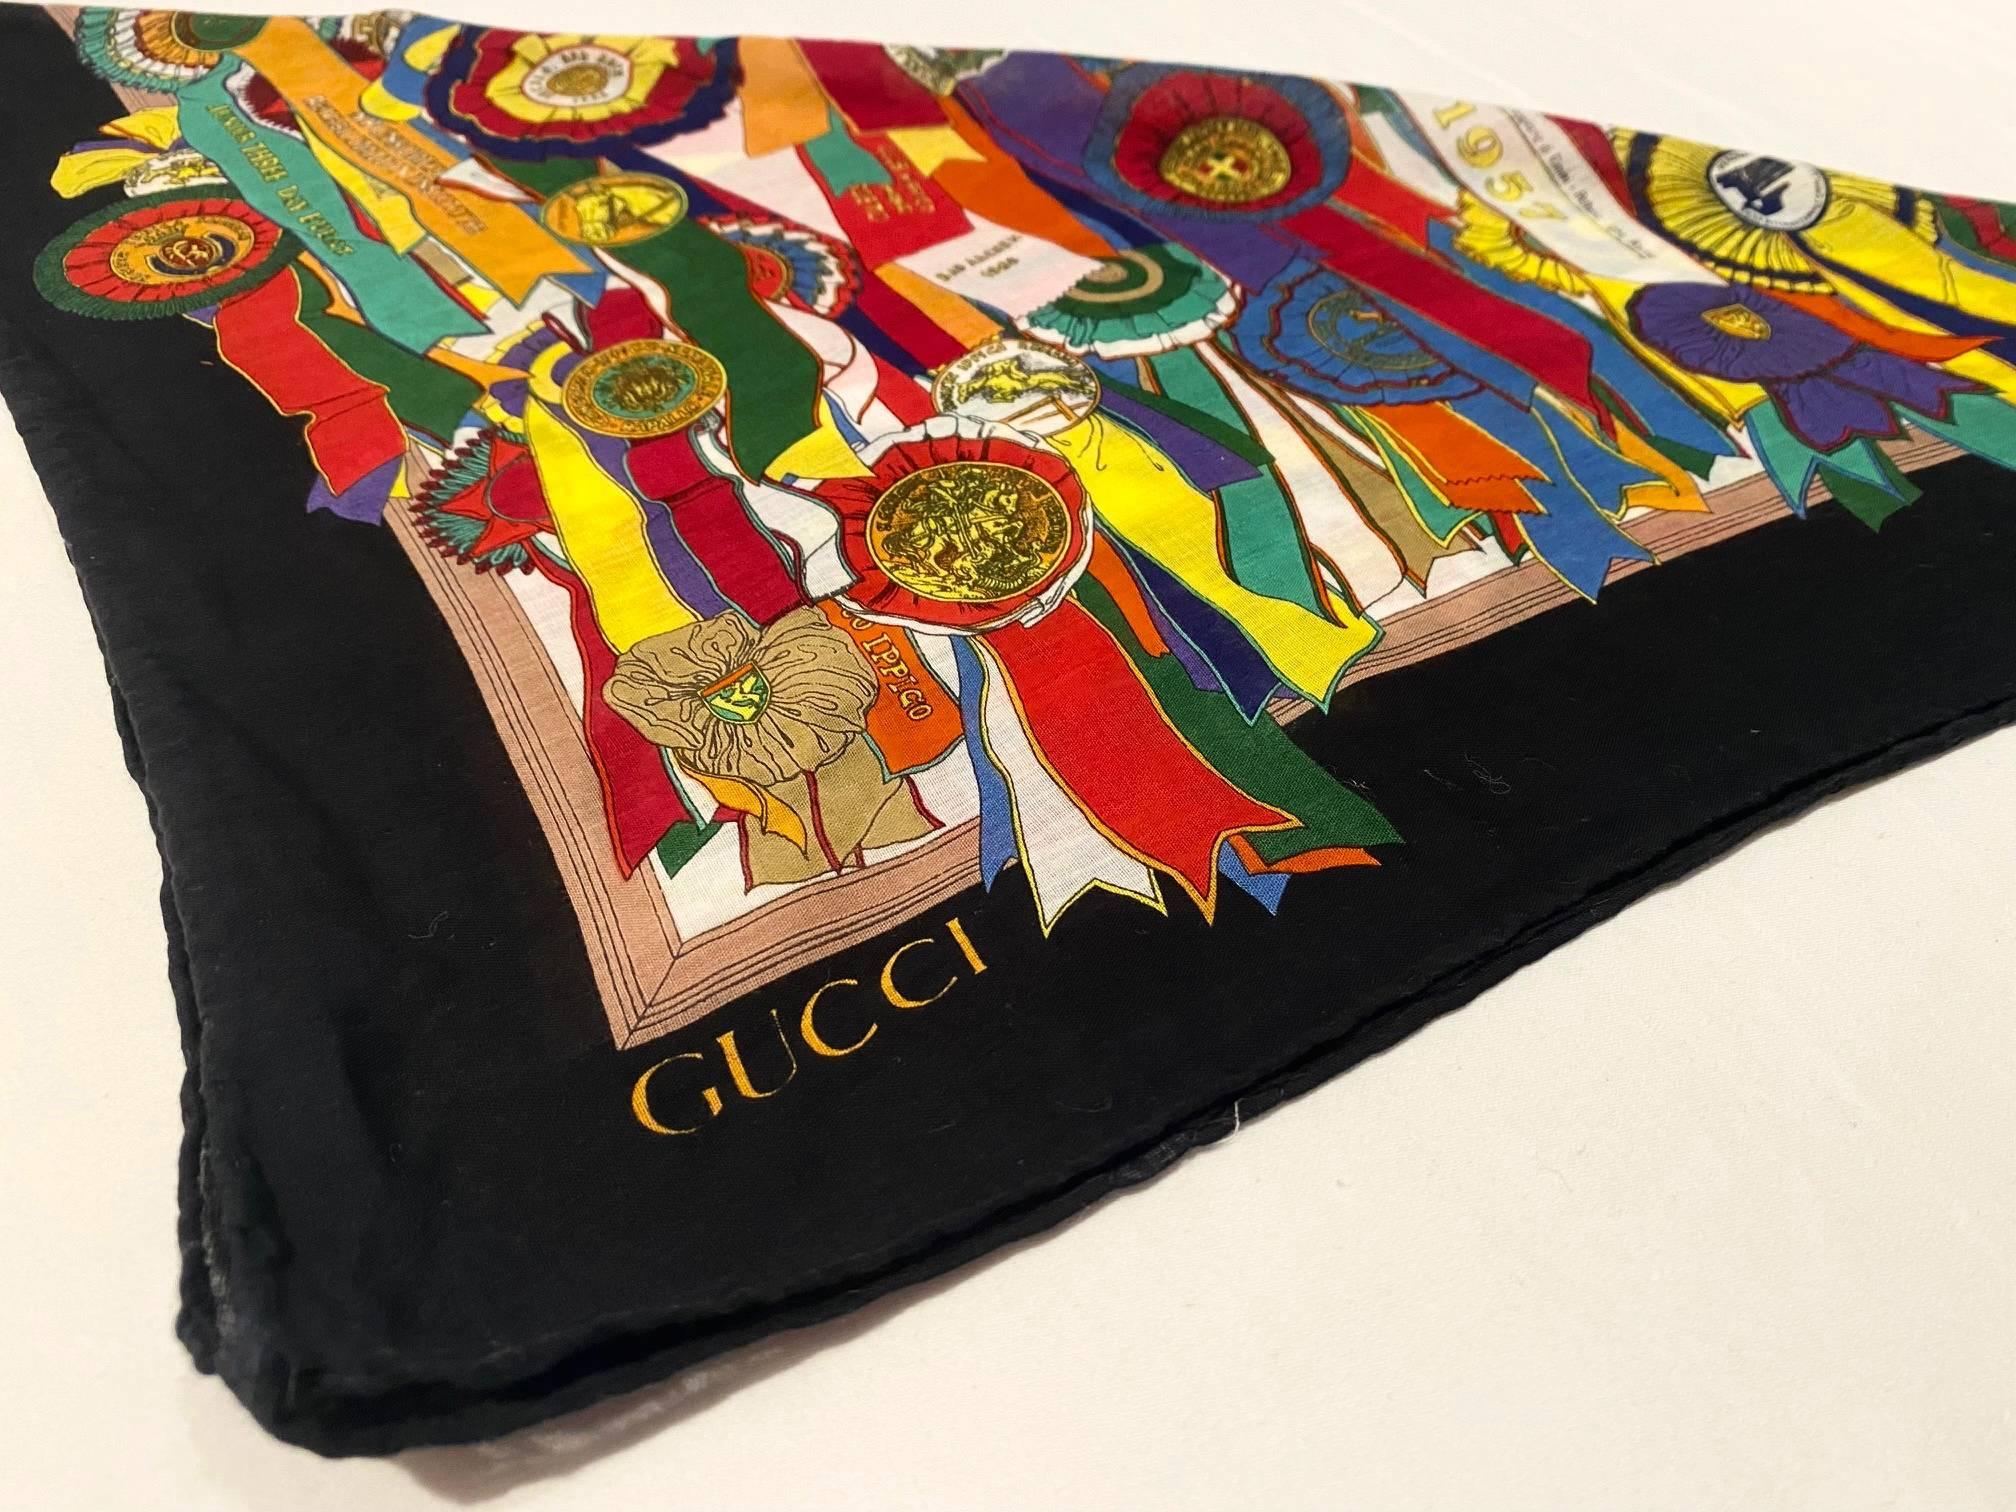 Gucci neck scarf handkerchief, horse-riding rosettes multicolor print, 100% cotton, Made in Italy
Condition: 1980s, very good vintage 
Measurements: 18x18in / 45x45cm